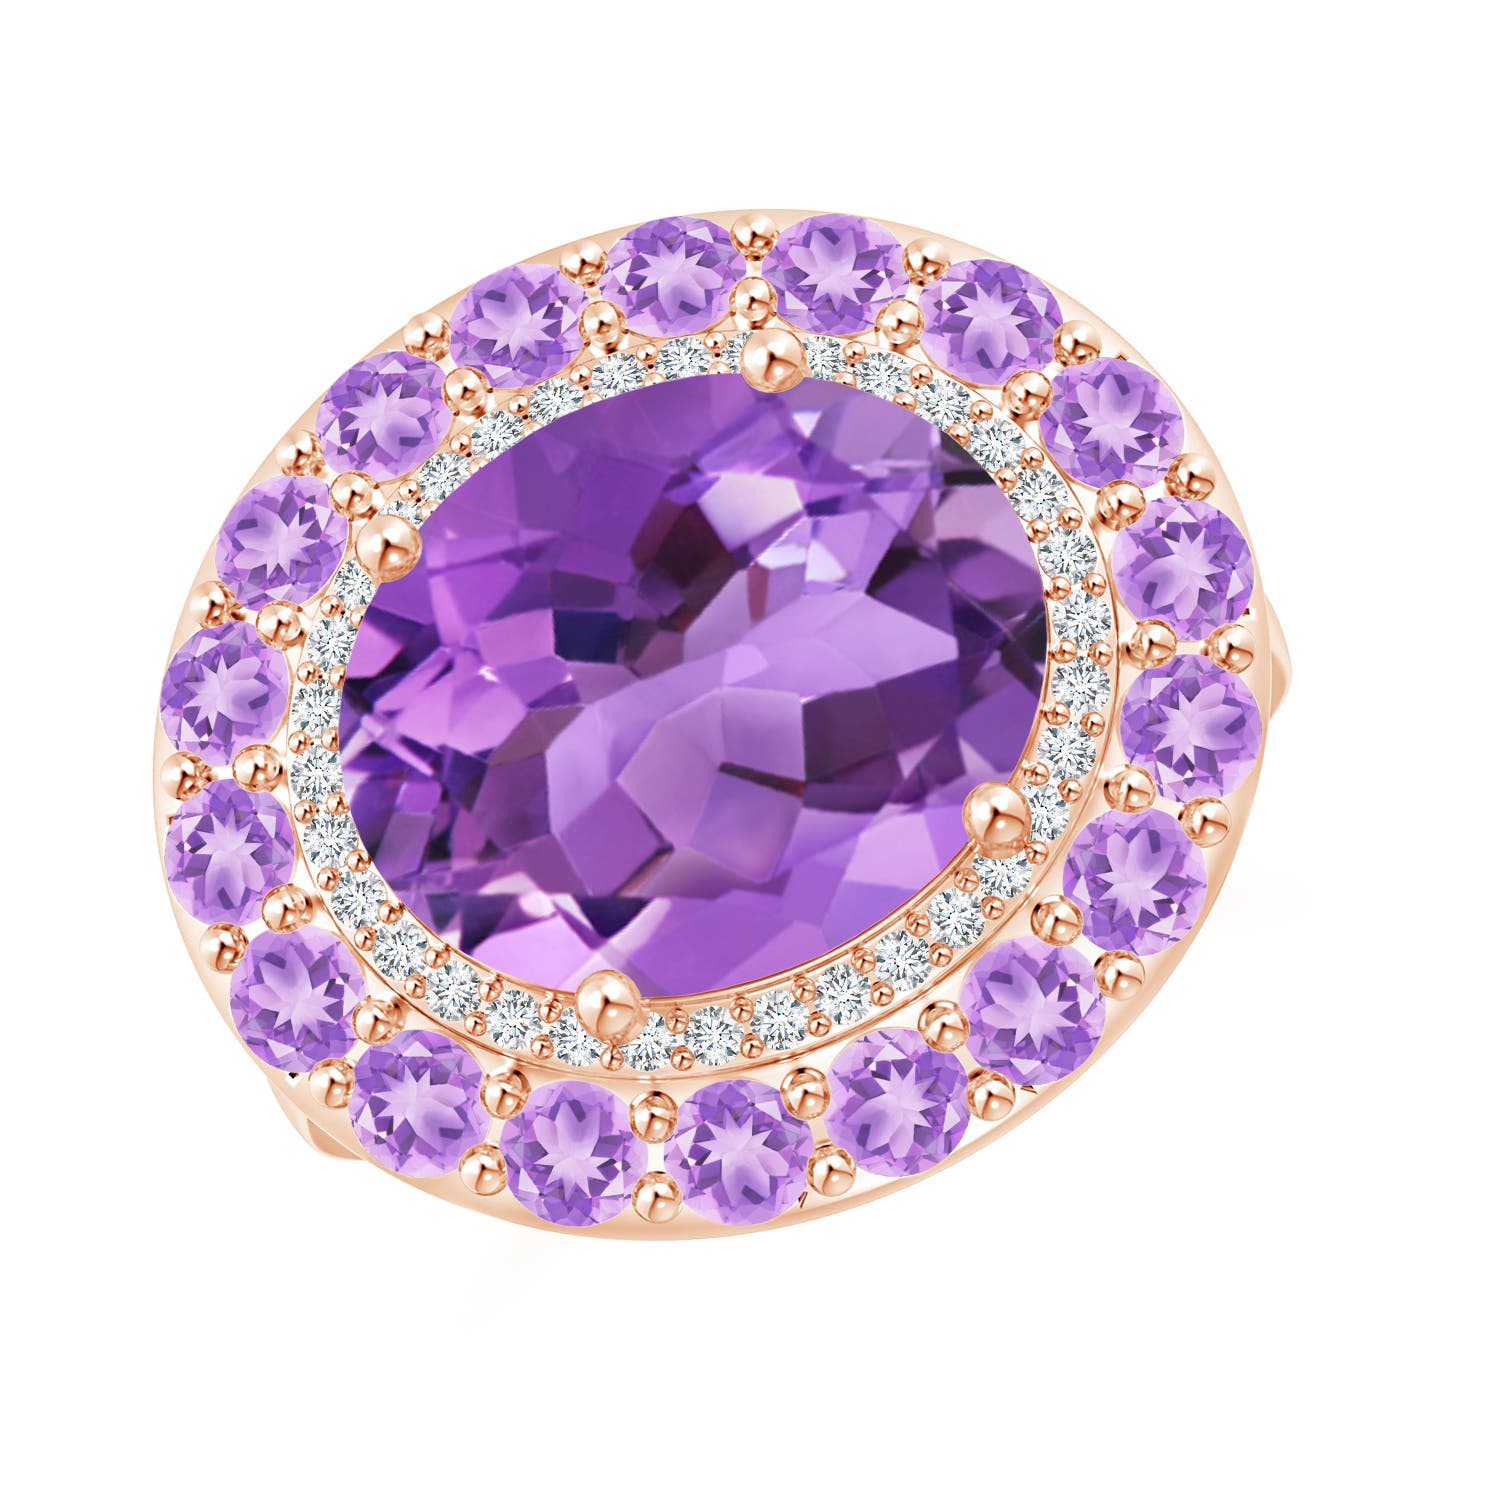 AA - Amethyst / 5.55 CT / 14 KT Rose Gold